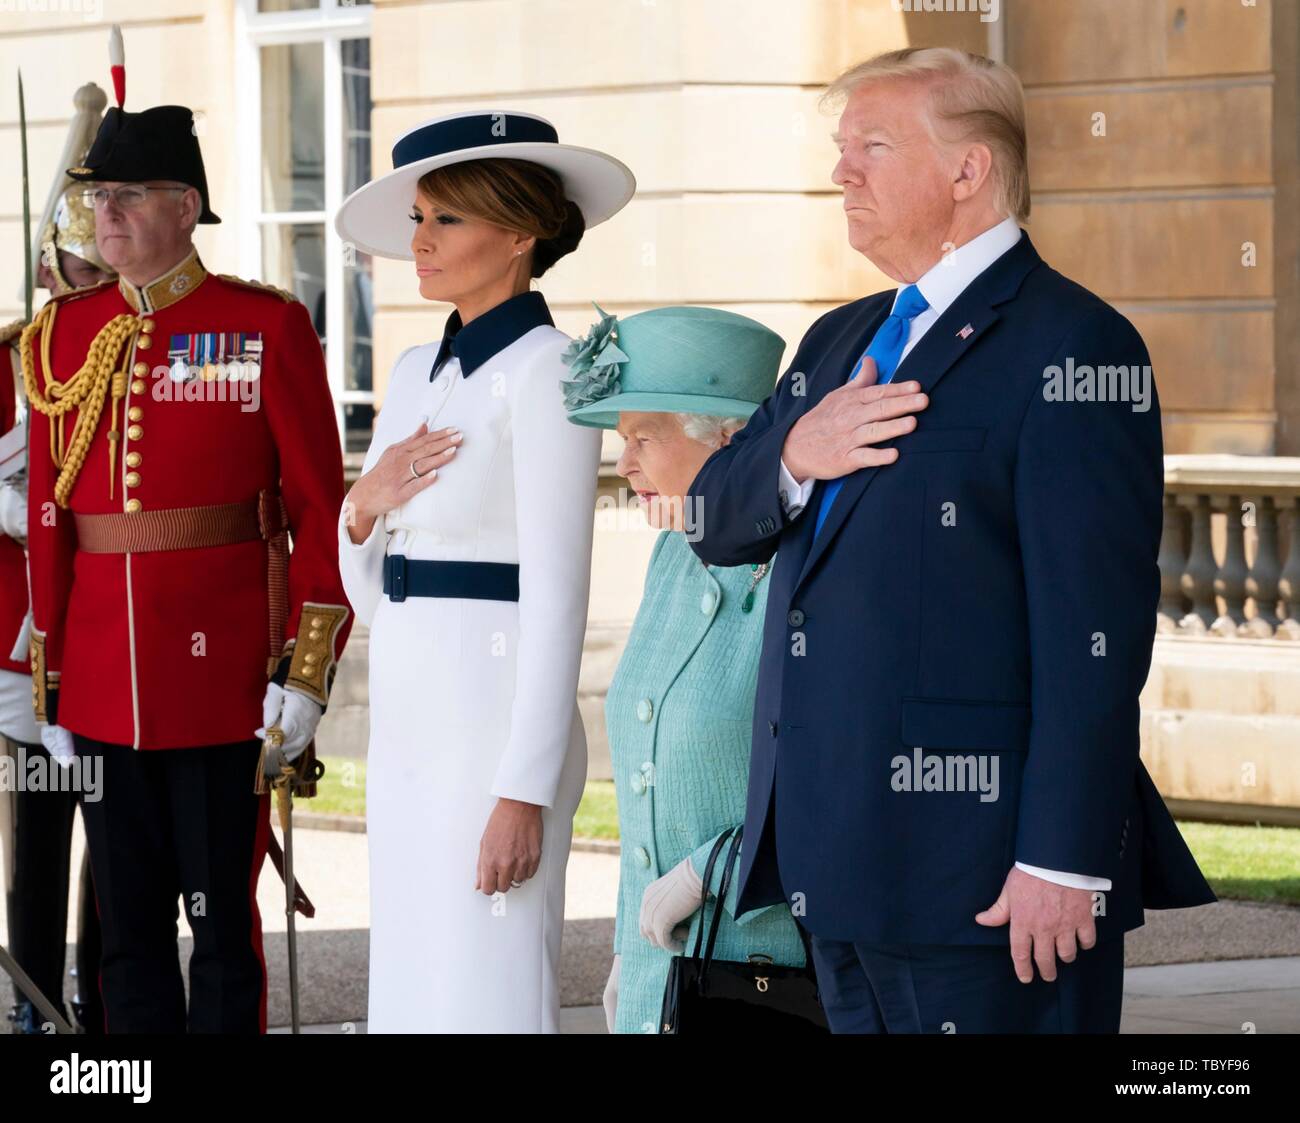 London, UK. 03rd June, 2019. U.S President Donald Trump, stands with First Lady Melania Trump, and Queen Elizabeth II for the national anthems during the official welcoming ceremony at Buckingham Palace June 3, 2019 in London, England. Credit: Planetpix/Alamy Live News Stock Photo